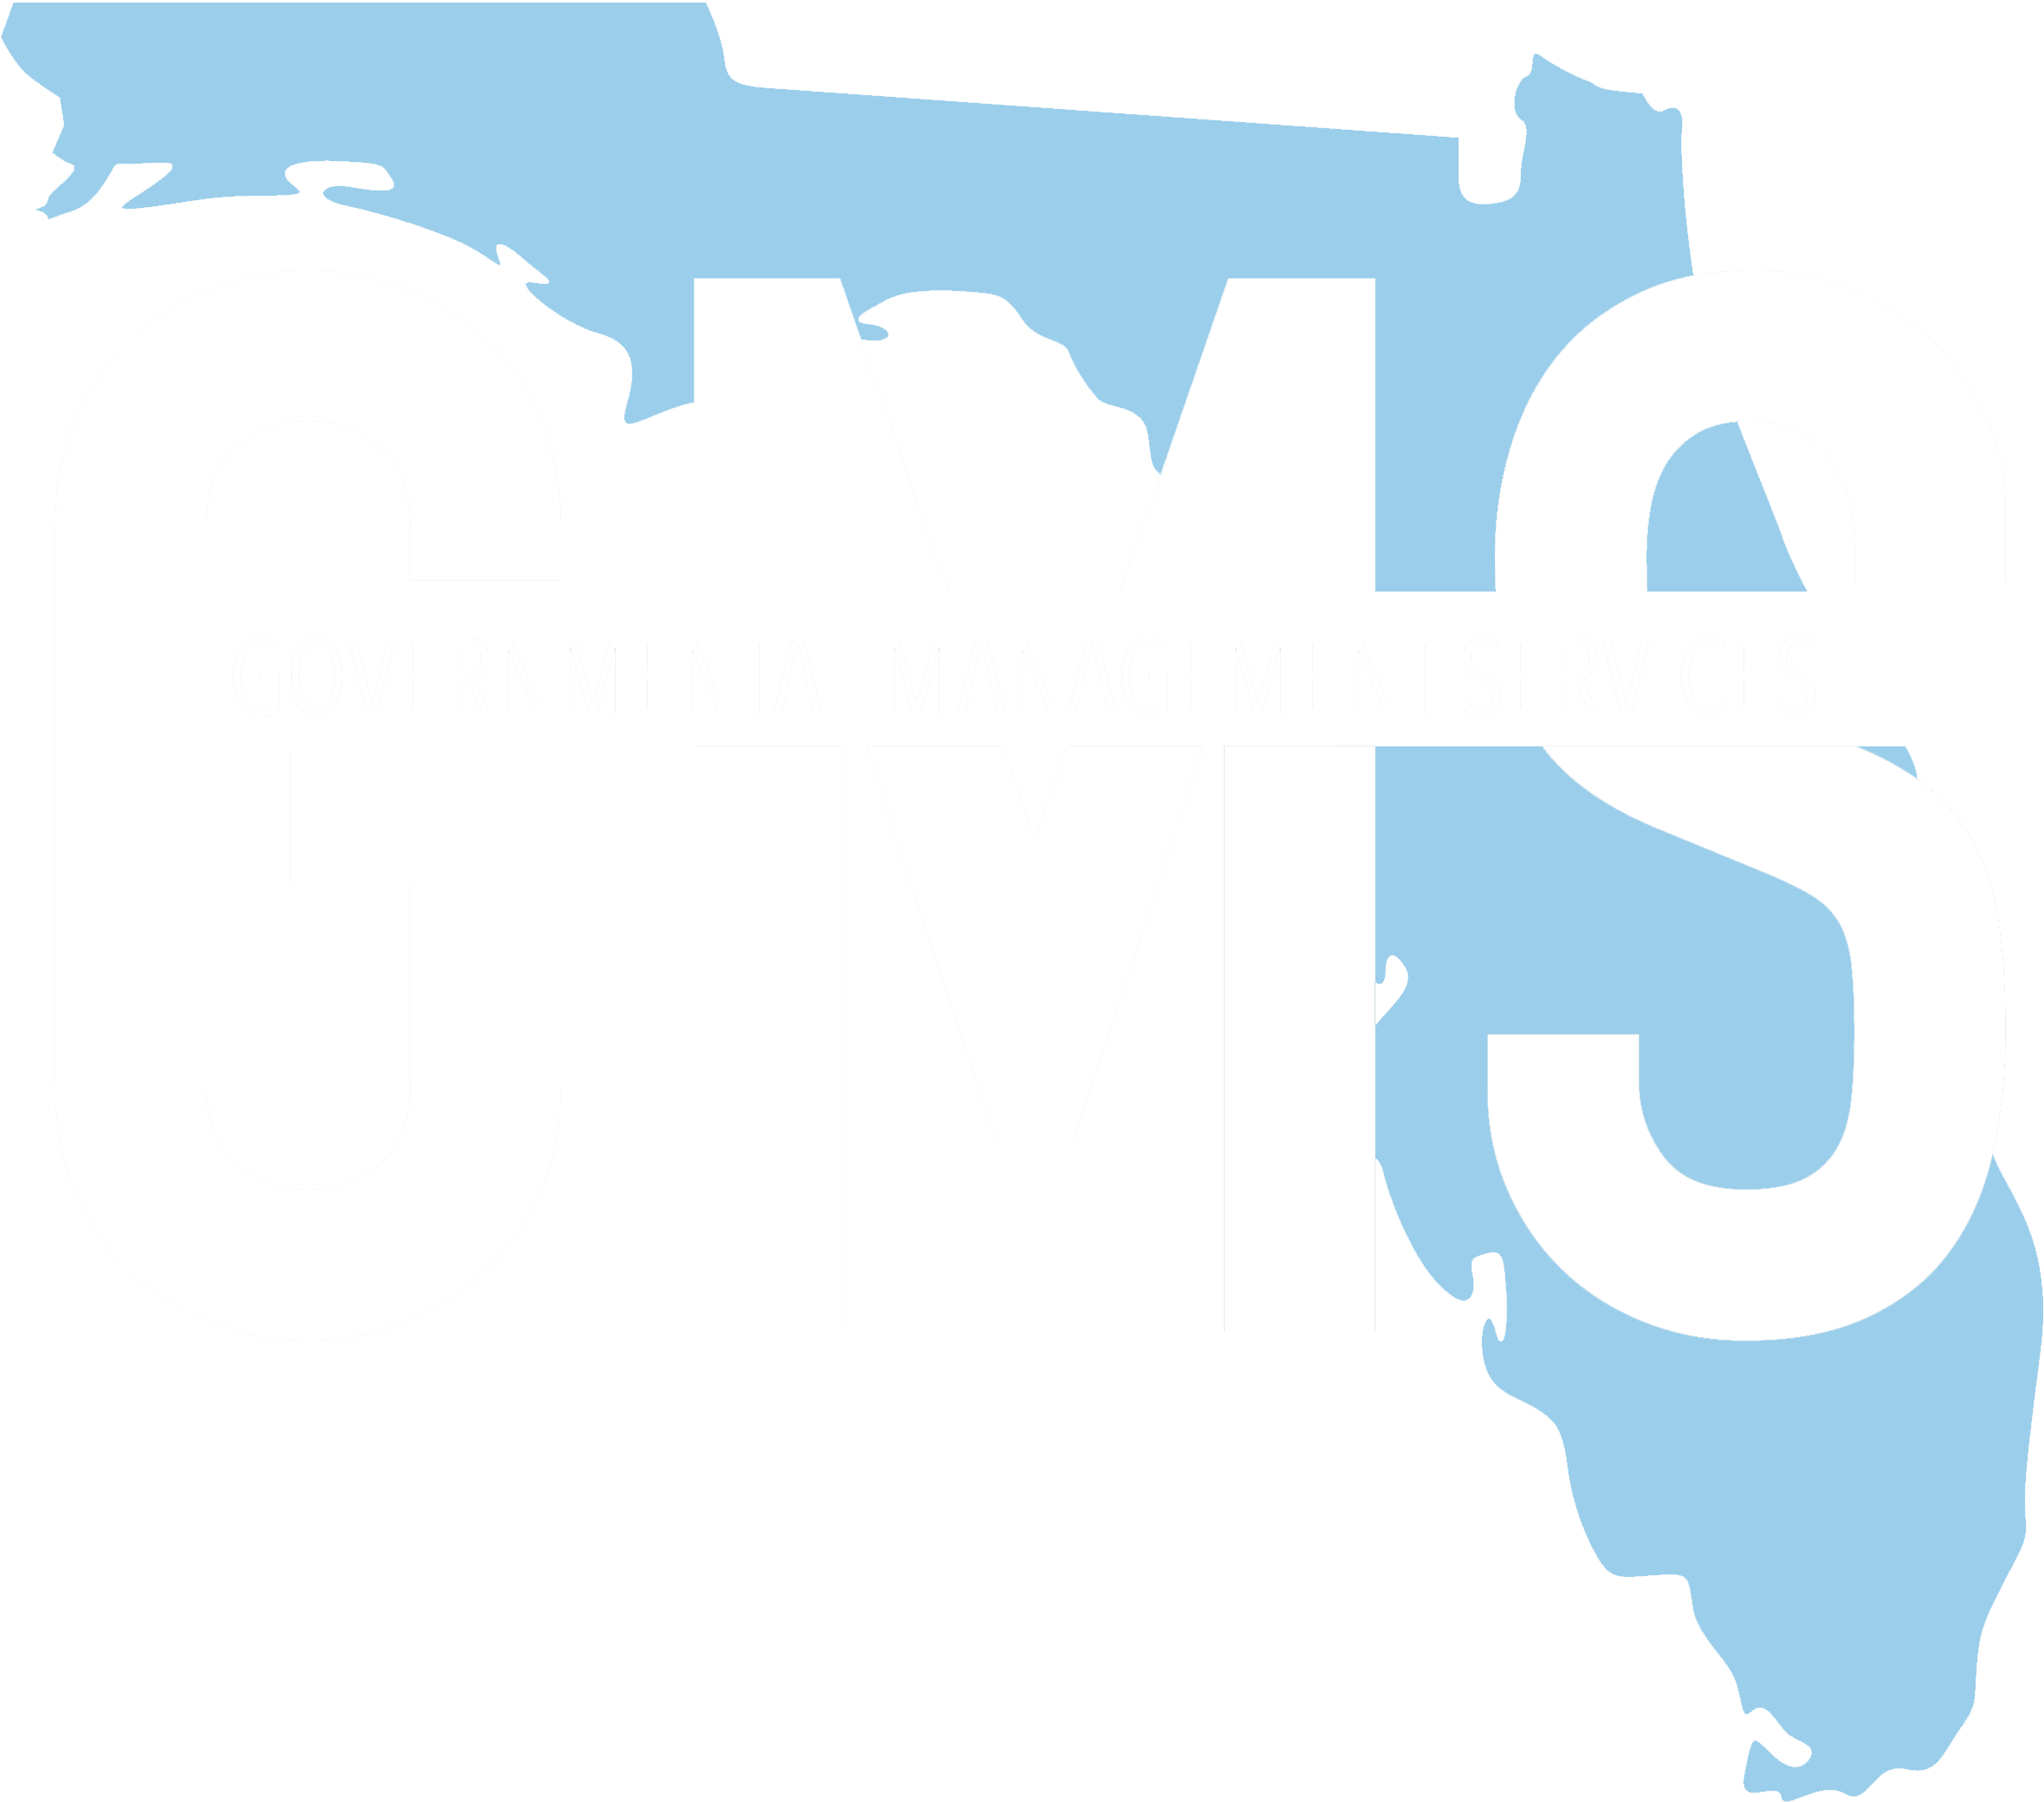 Governmental Management Services